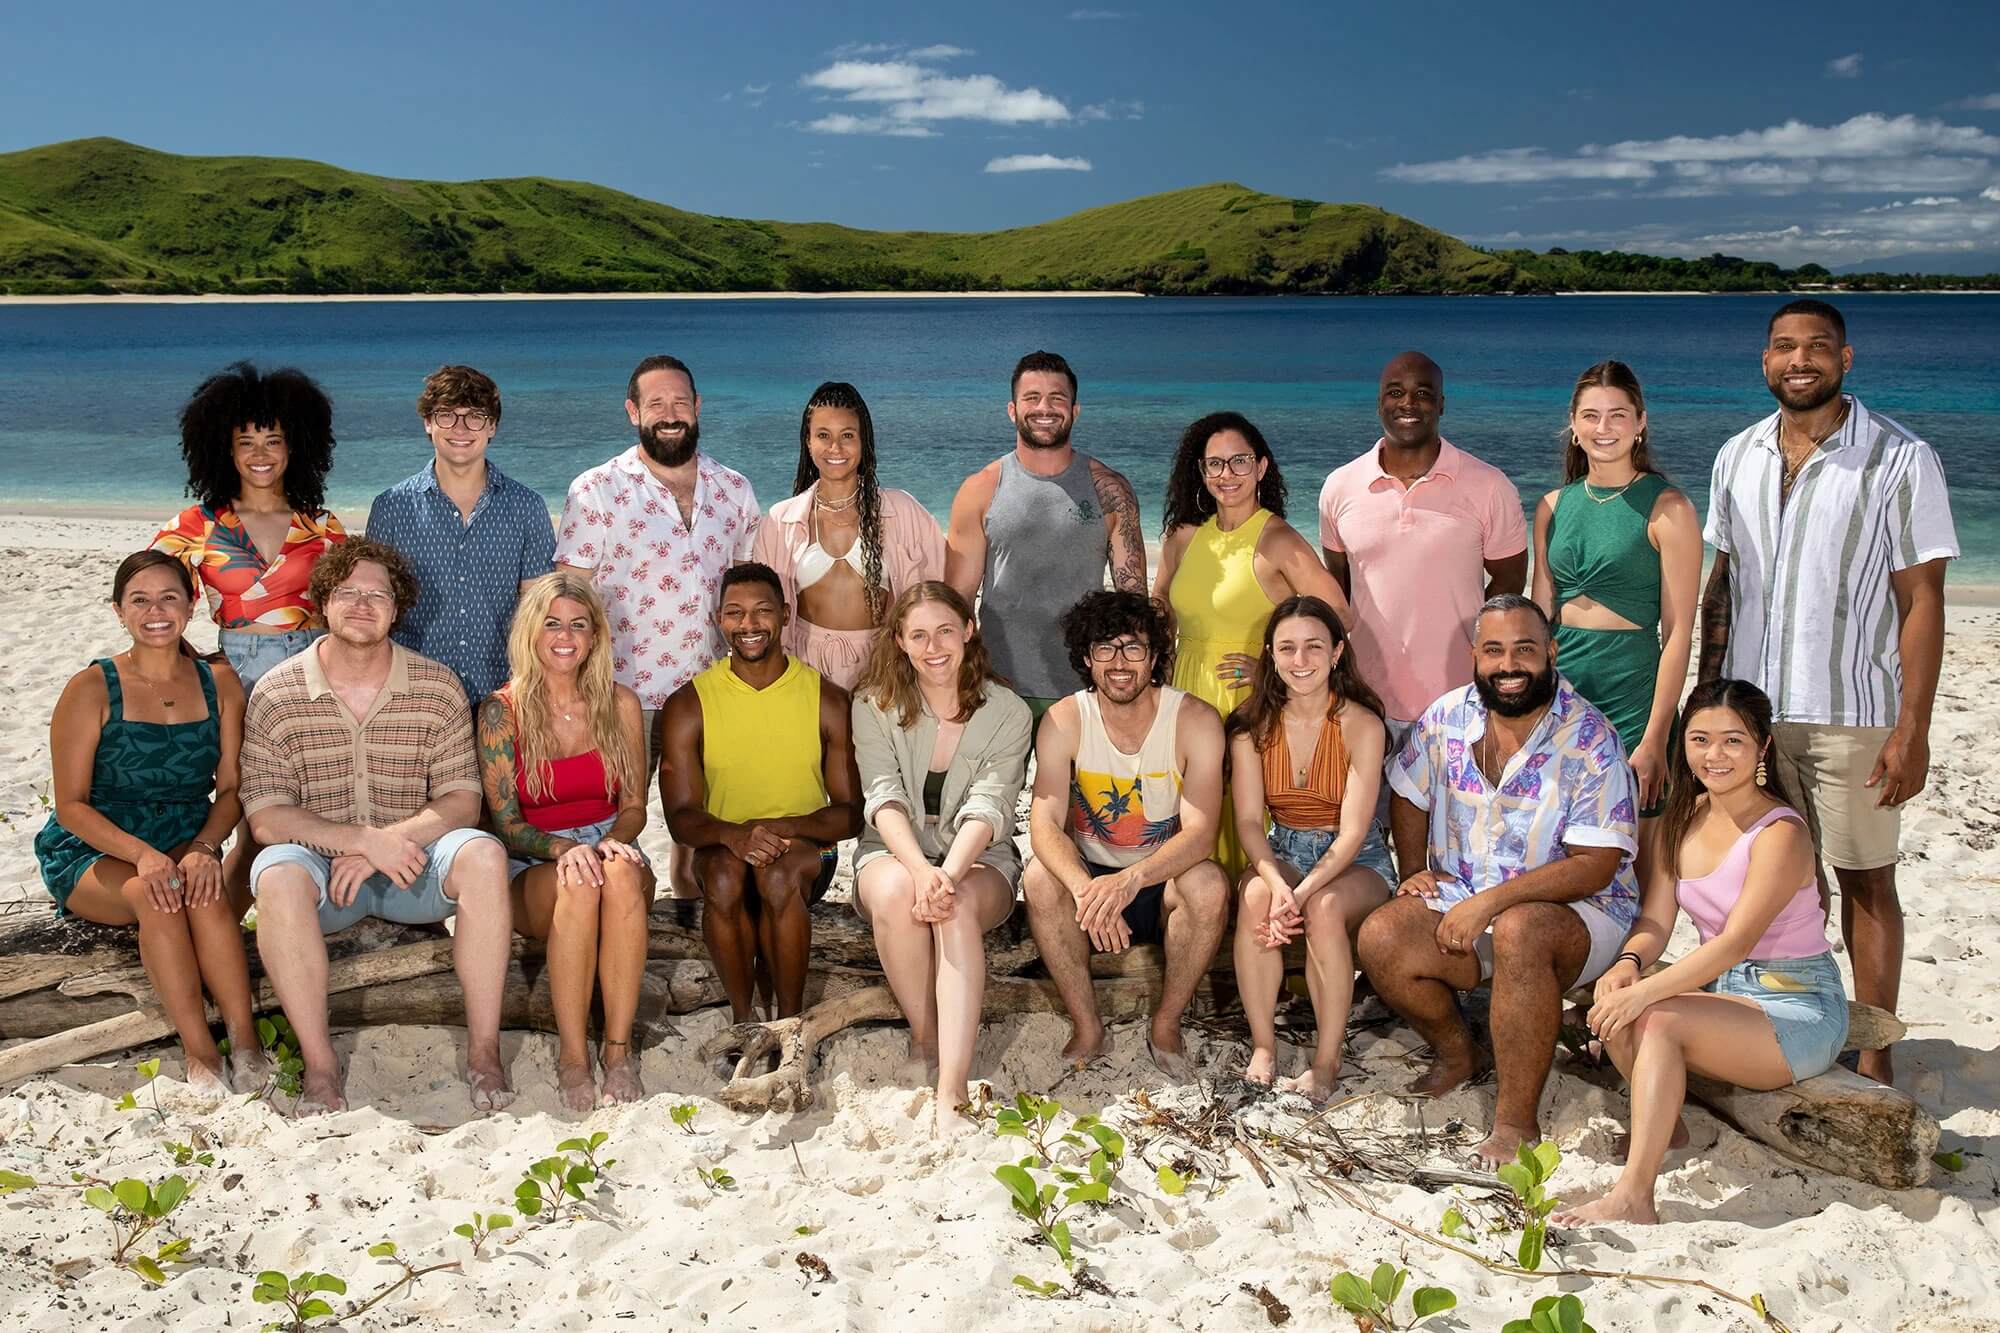 Who Was Voted Out In Survivor 44 Episode 4